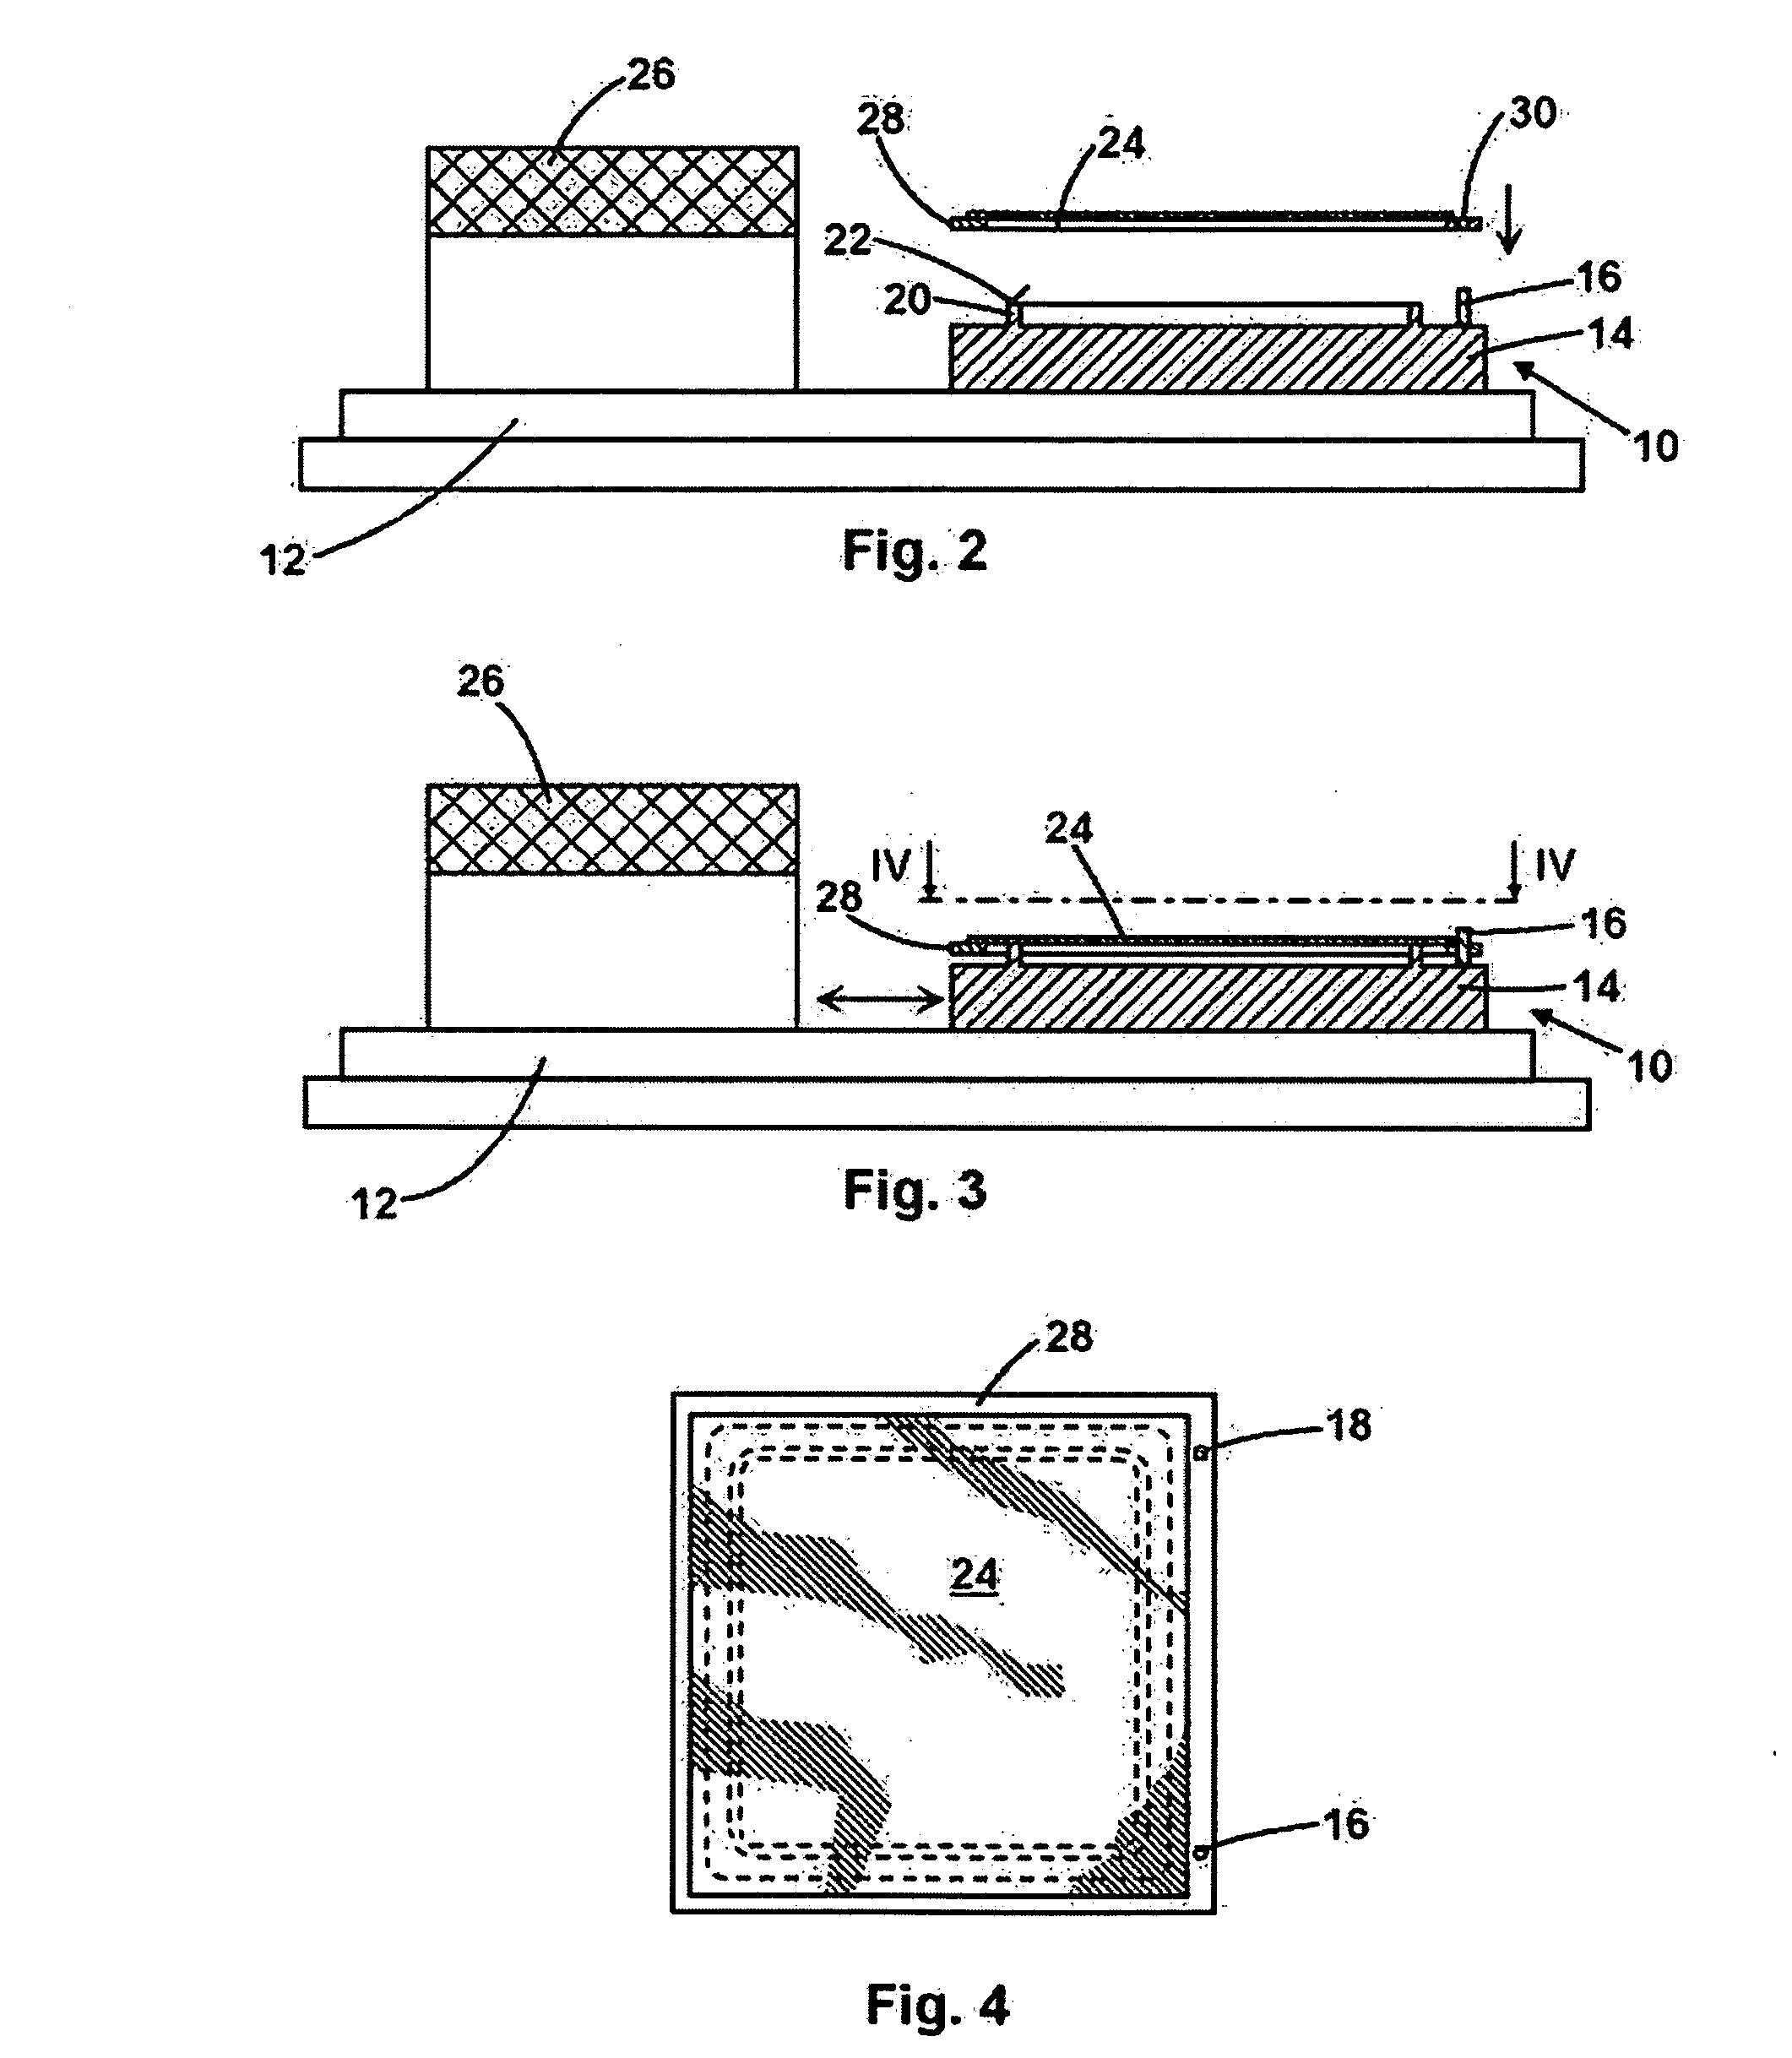 Laser exposure apparatus for exposing a screen held in a frame